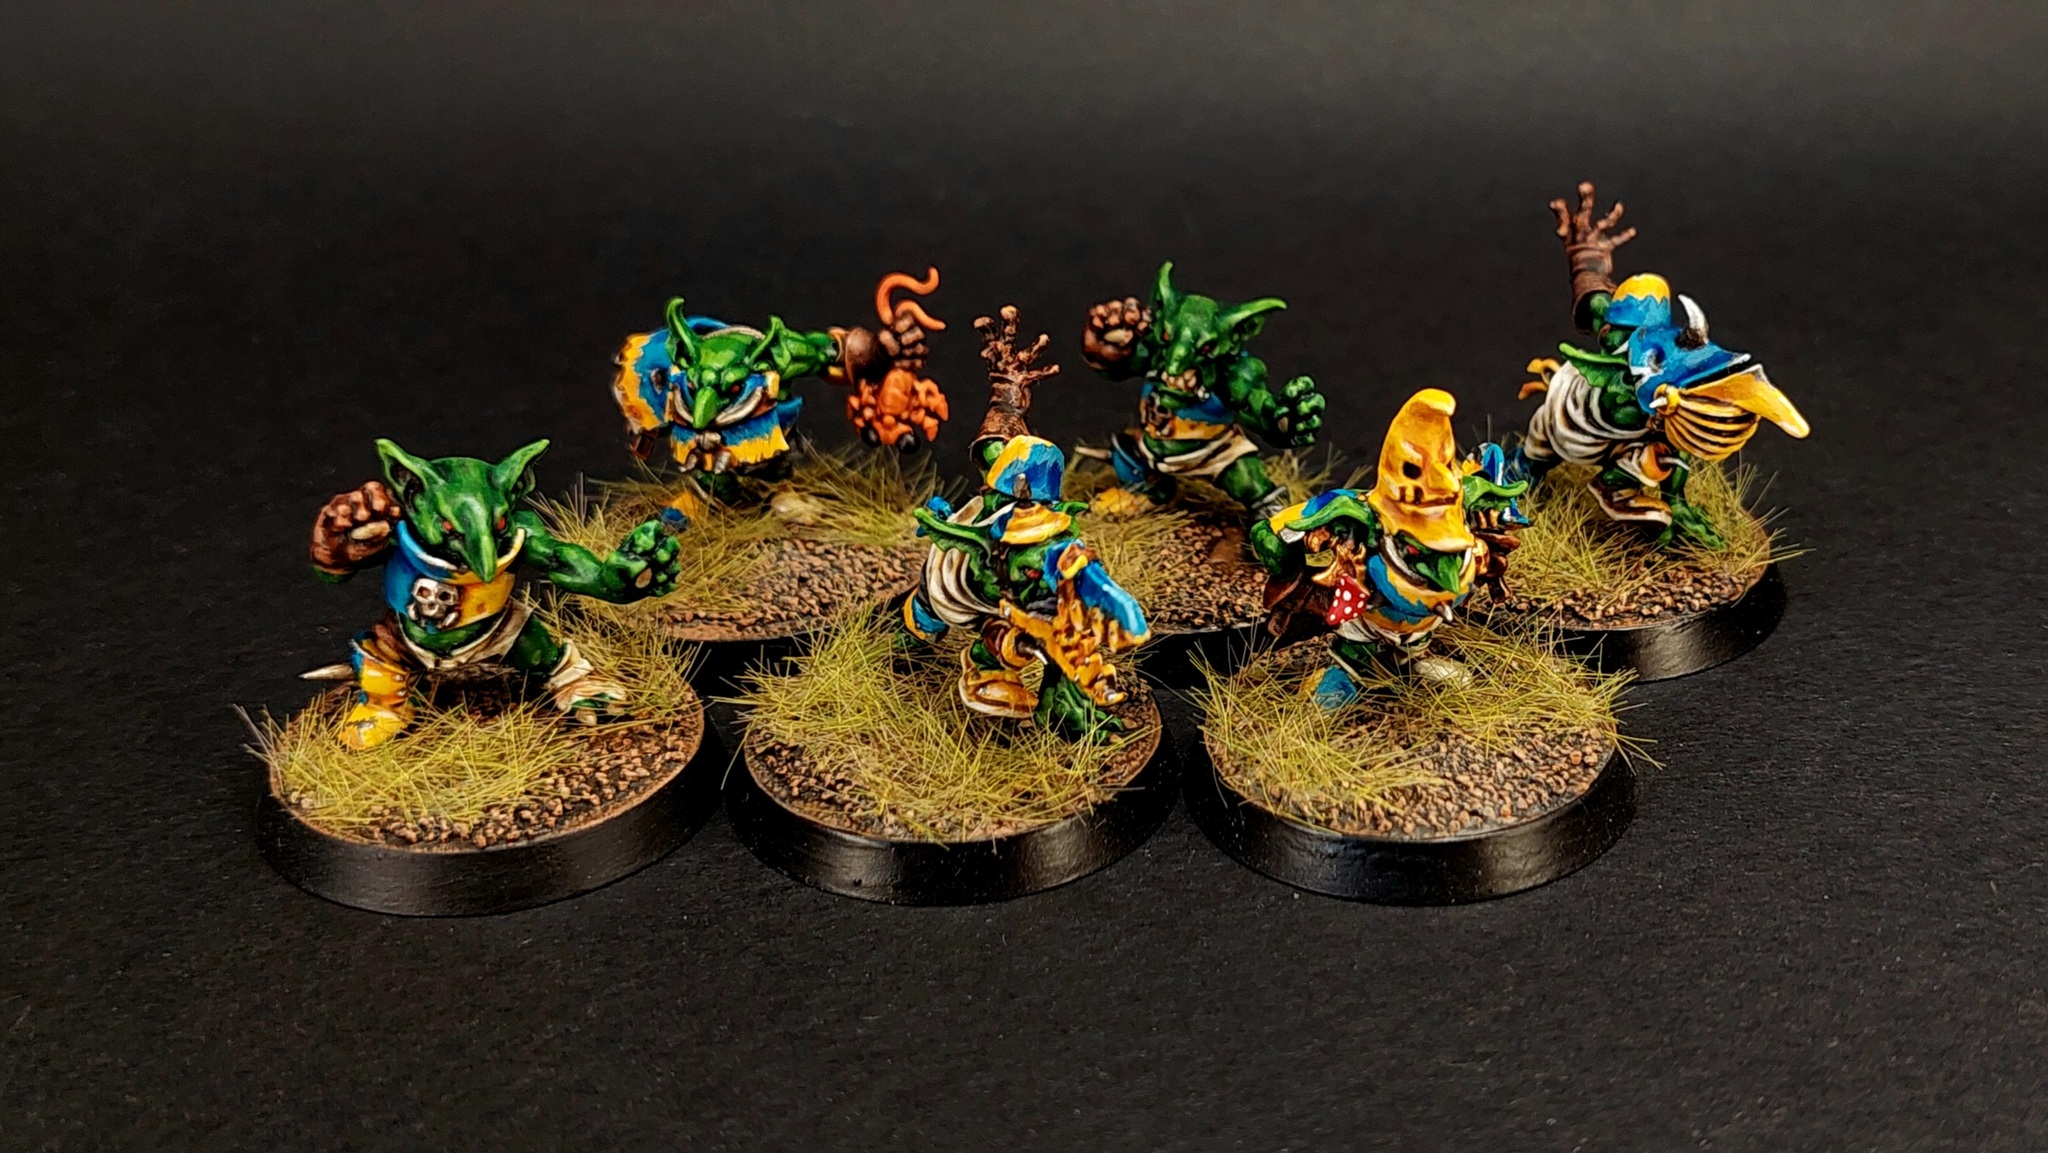 Blood Bowl orc team - Hobby, Warhammer, Blood Bowl, Painting miniatures, Collecting, Miniature, Figurines, Video, Soundless, Longpost